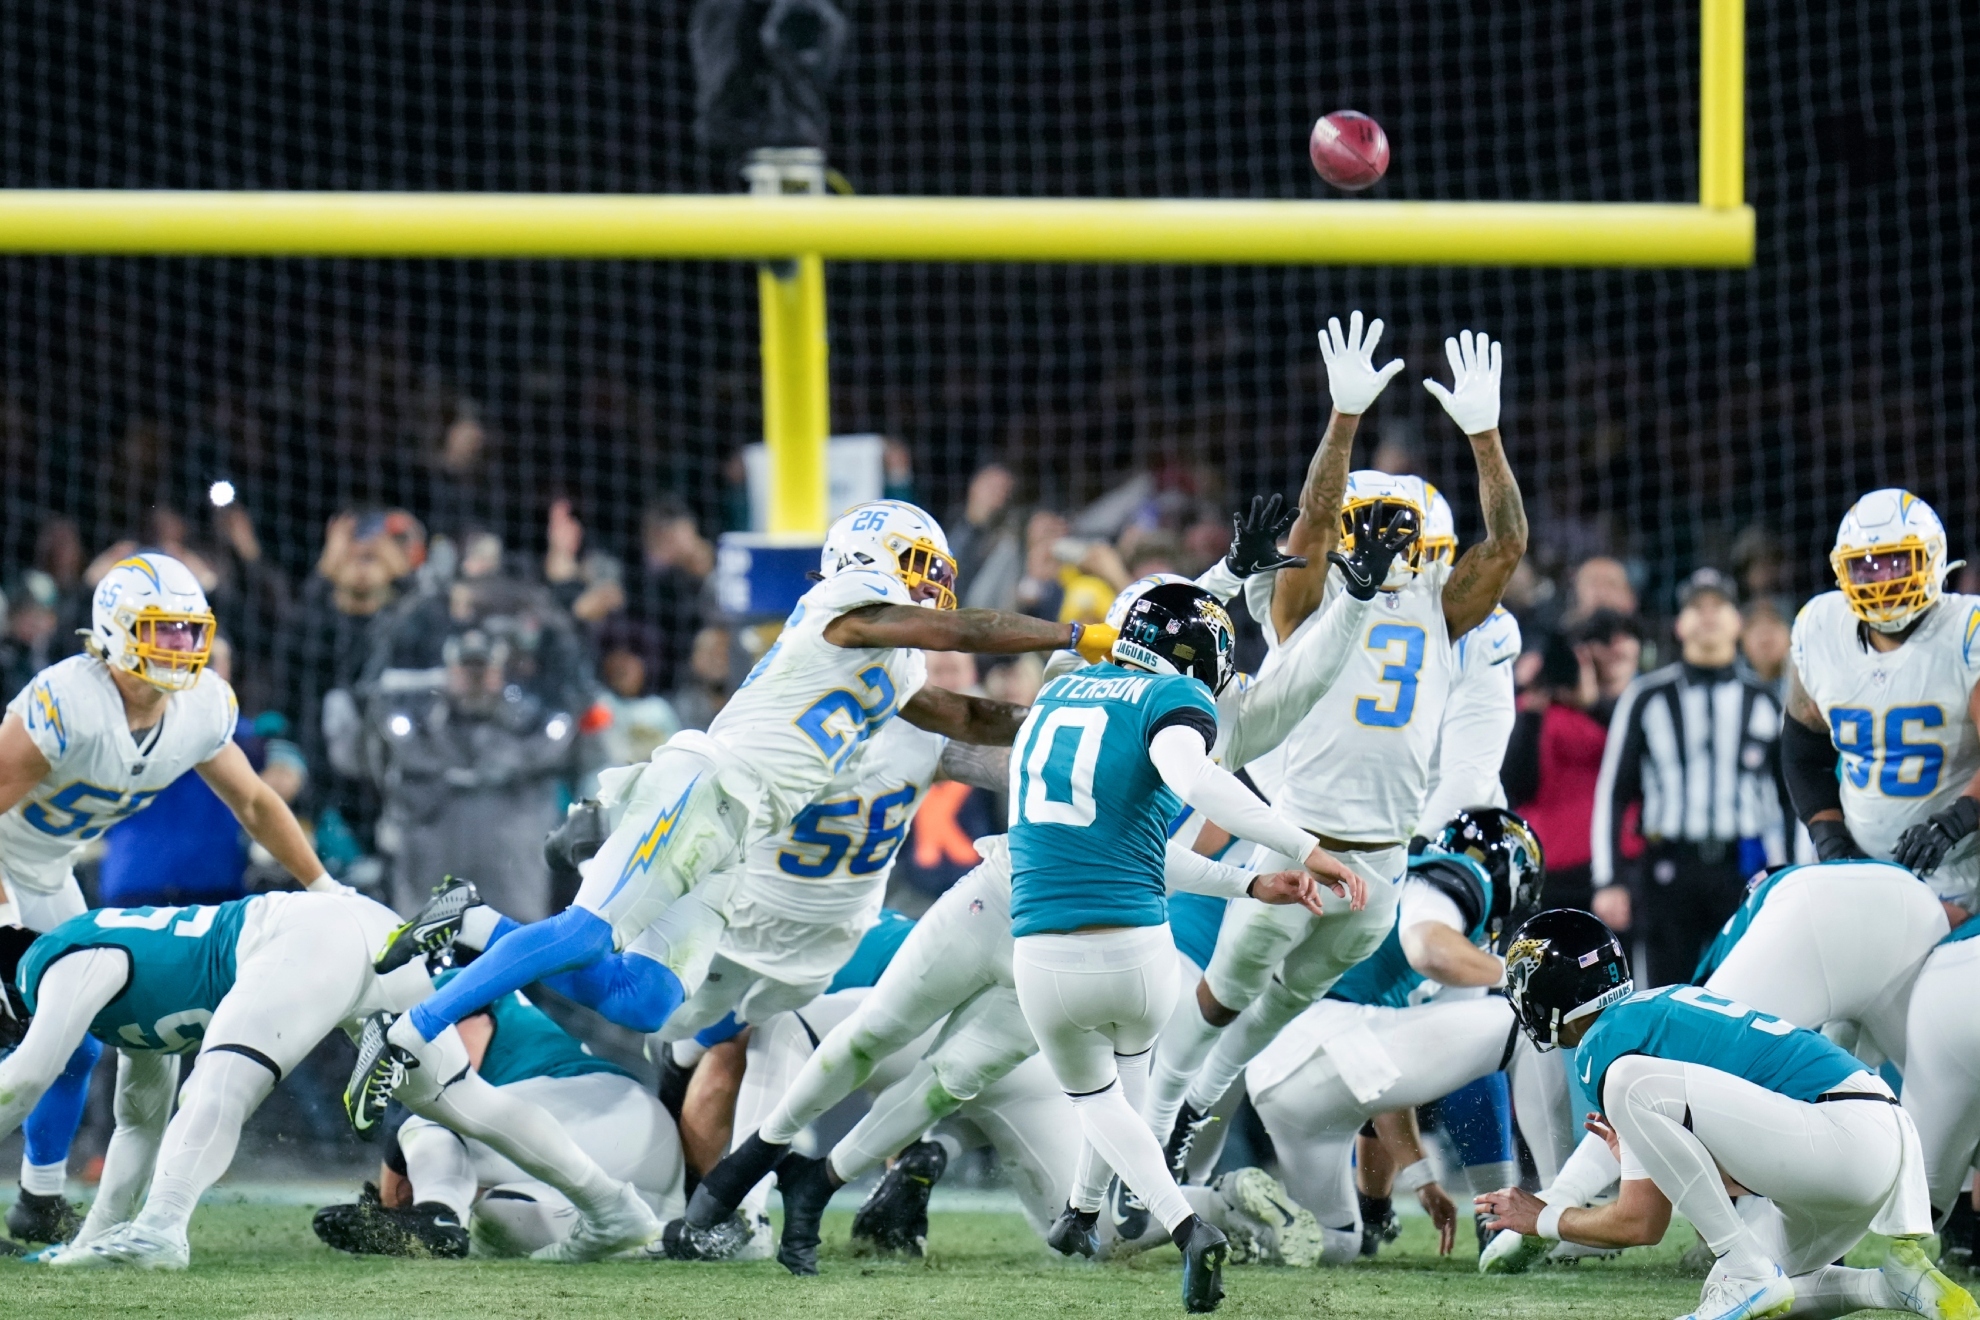 Jaguars make podium of largest NFL playoff comebacks: They were down 27-0, but won 31-30!